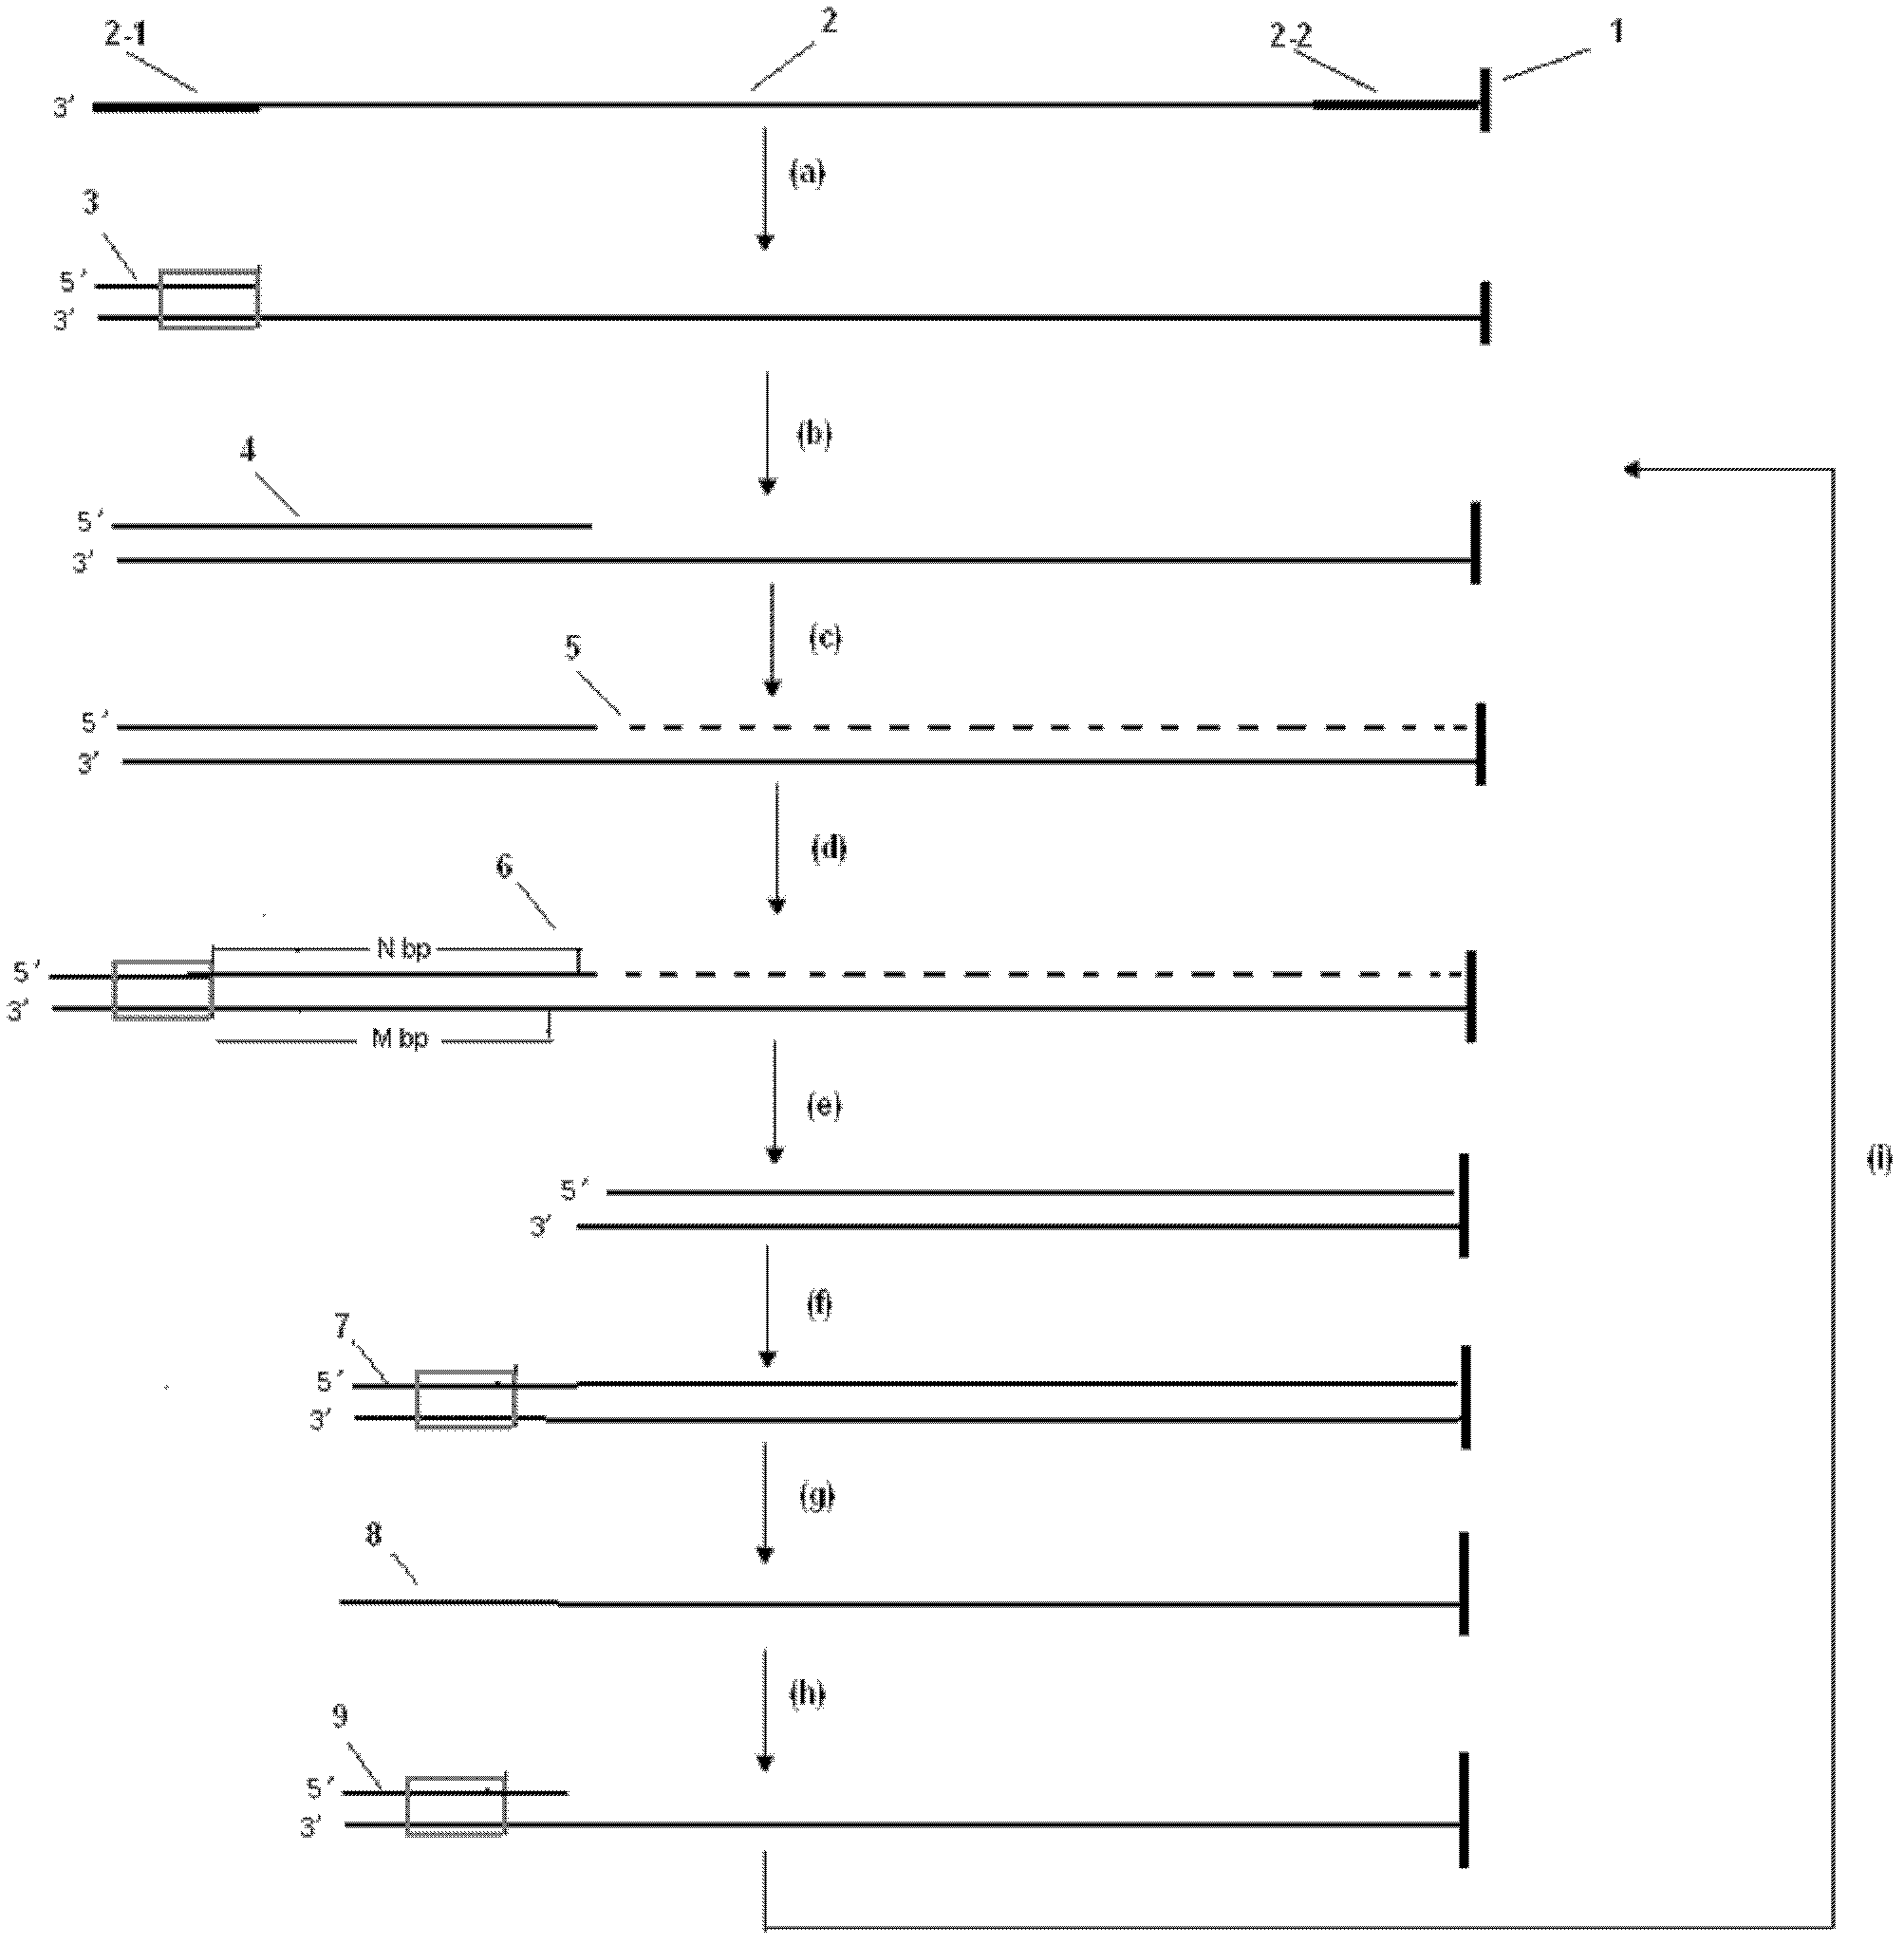 A dna sequencing method for shortening dna template and its application